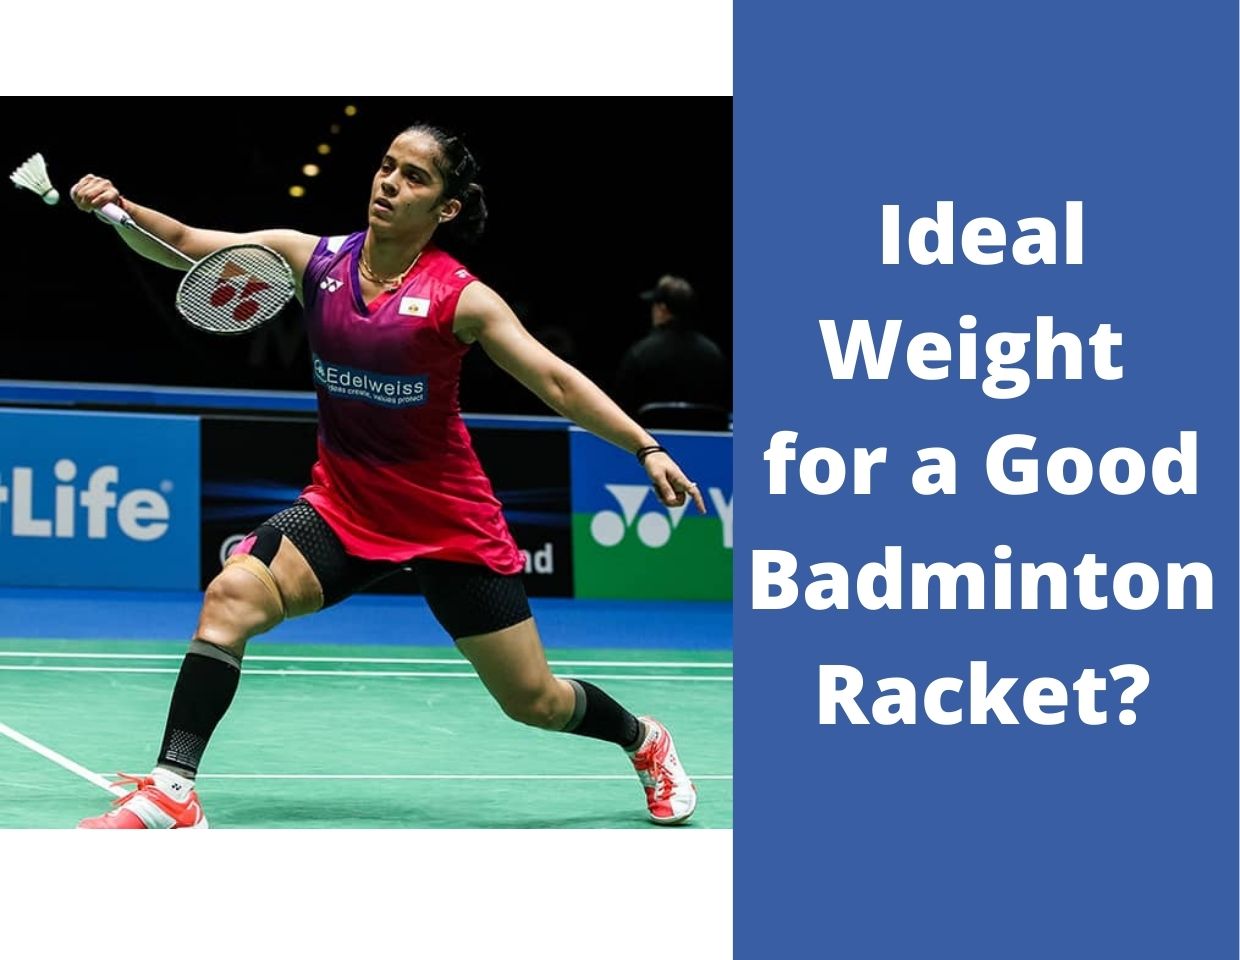 Ideal Weight for a Good Badminton Racket